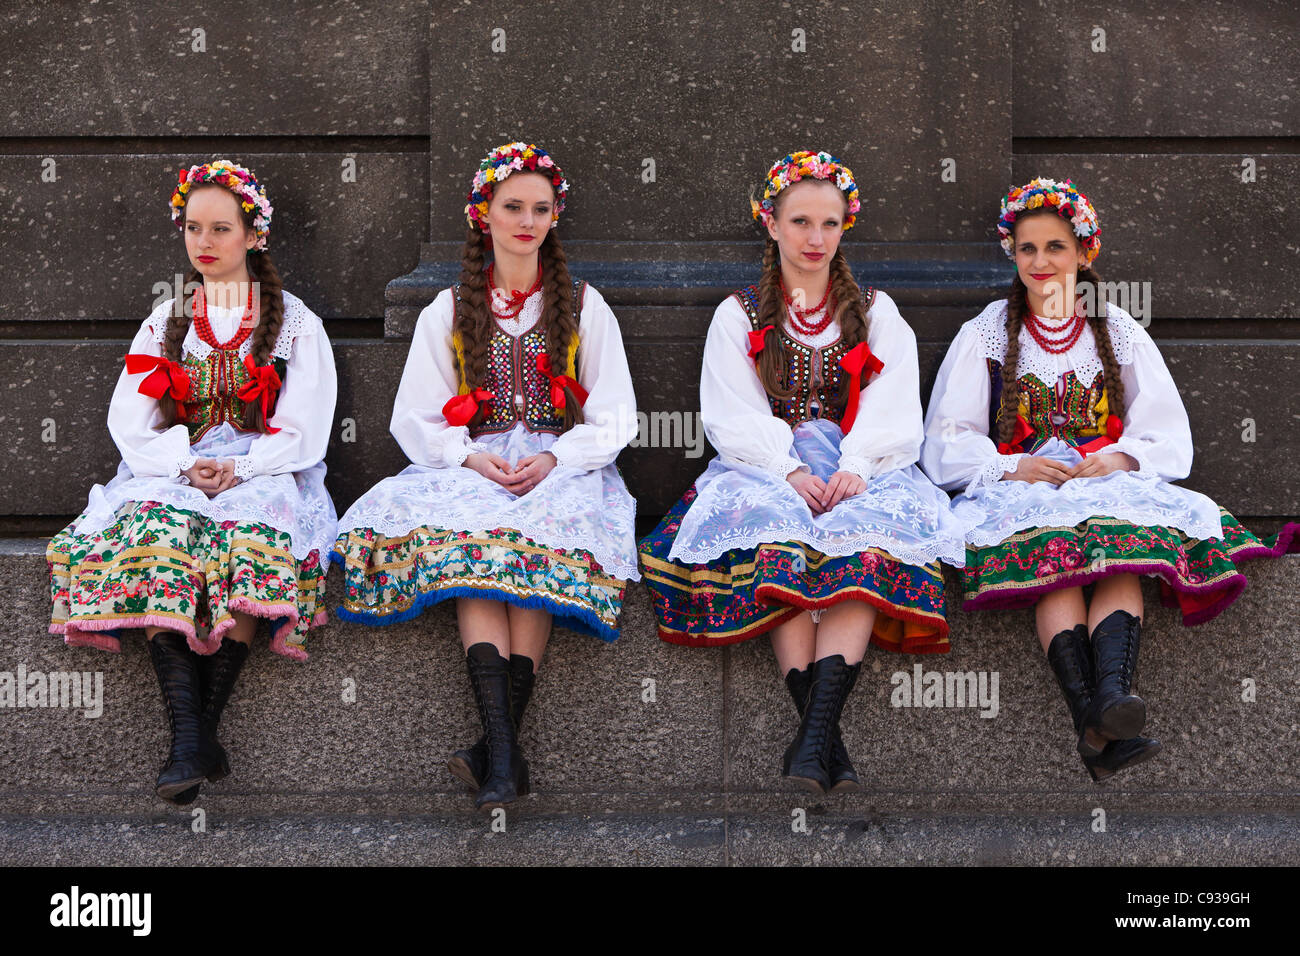 Buy > traditional polish women's clothing > in stock